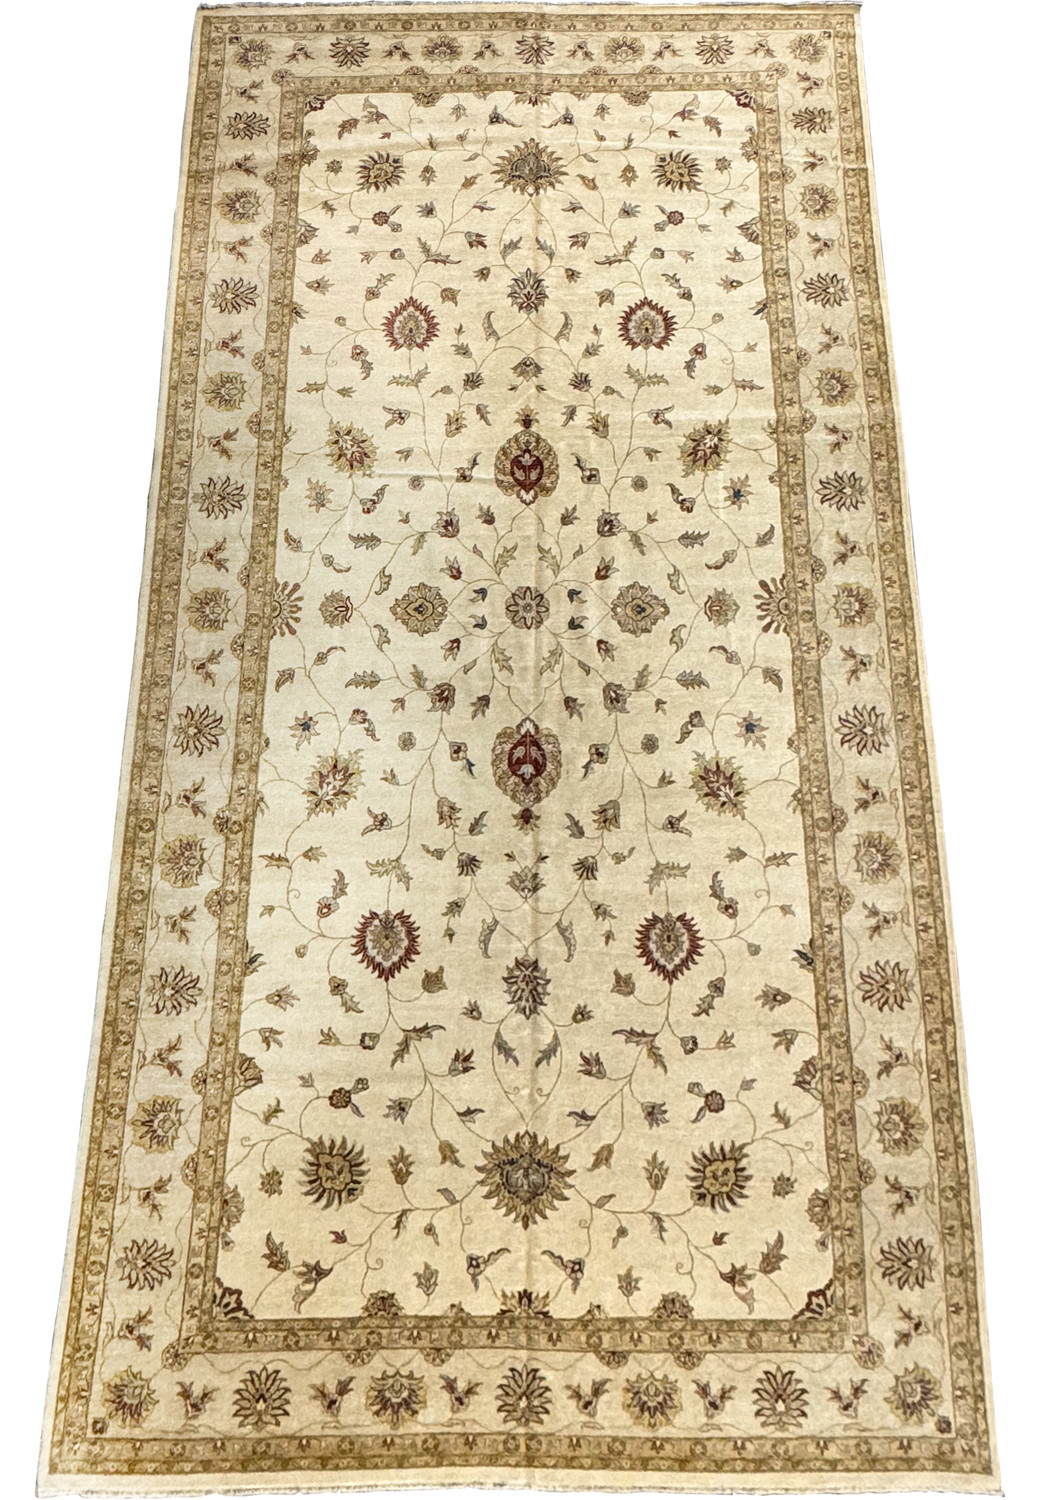 Alternate full view showing the detailed designs and earthy tones of the 12x24 Palace Size Chobi rug